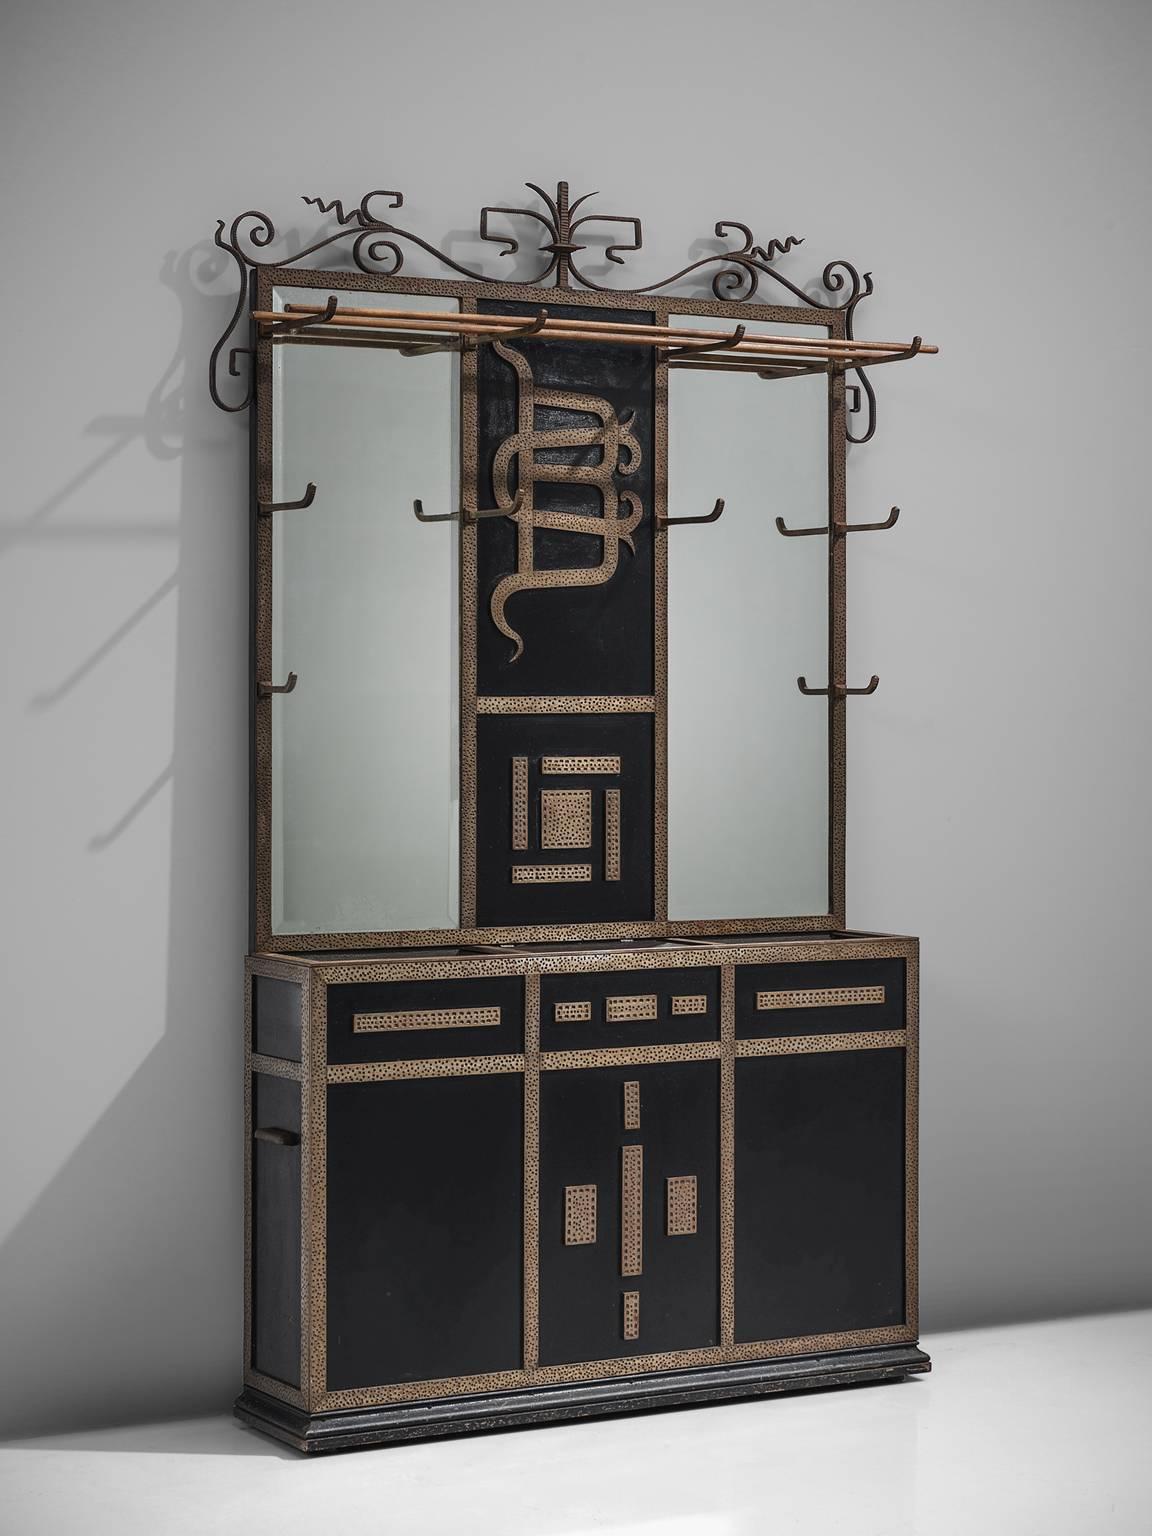 Console with mirror, black and patinated metal, mirror, wood, France, circa 1950.

This wall unit has a graphic, stylized bottom unit and a mirror with decorated metal panel in the middle. On top this cabinet holds a wooden hat rack. The middle